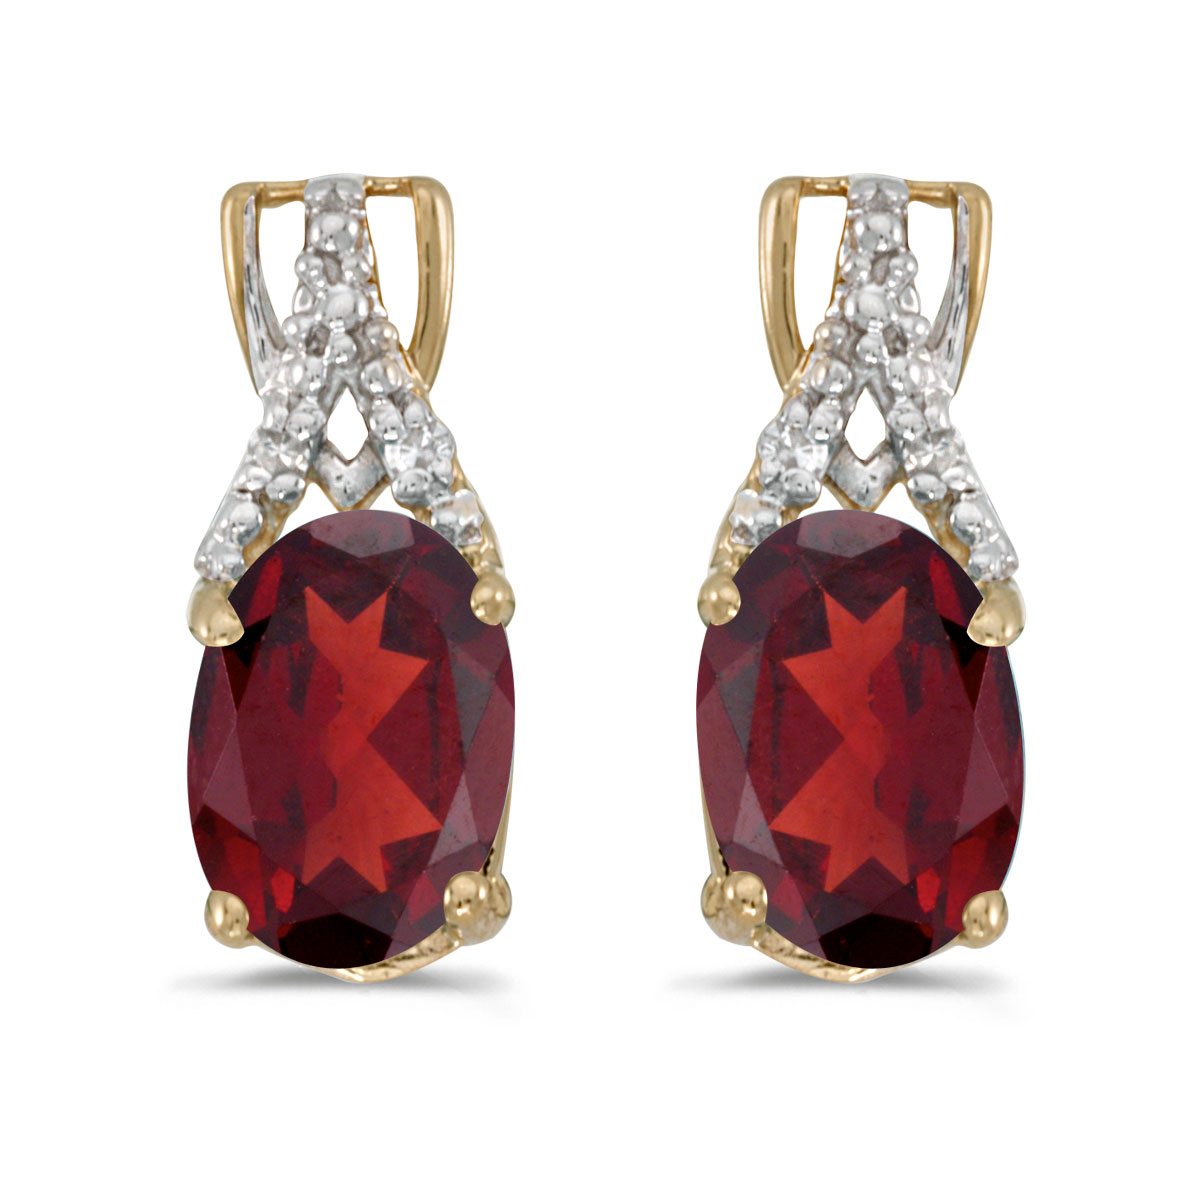 These 14k yellow gold oval garnet and diamond earrings feature 7x5 mm genuine natural garnets wit...